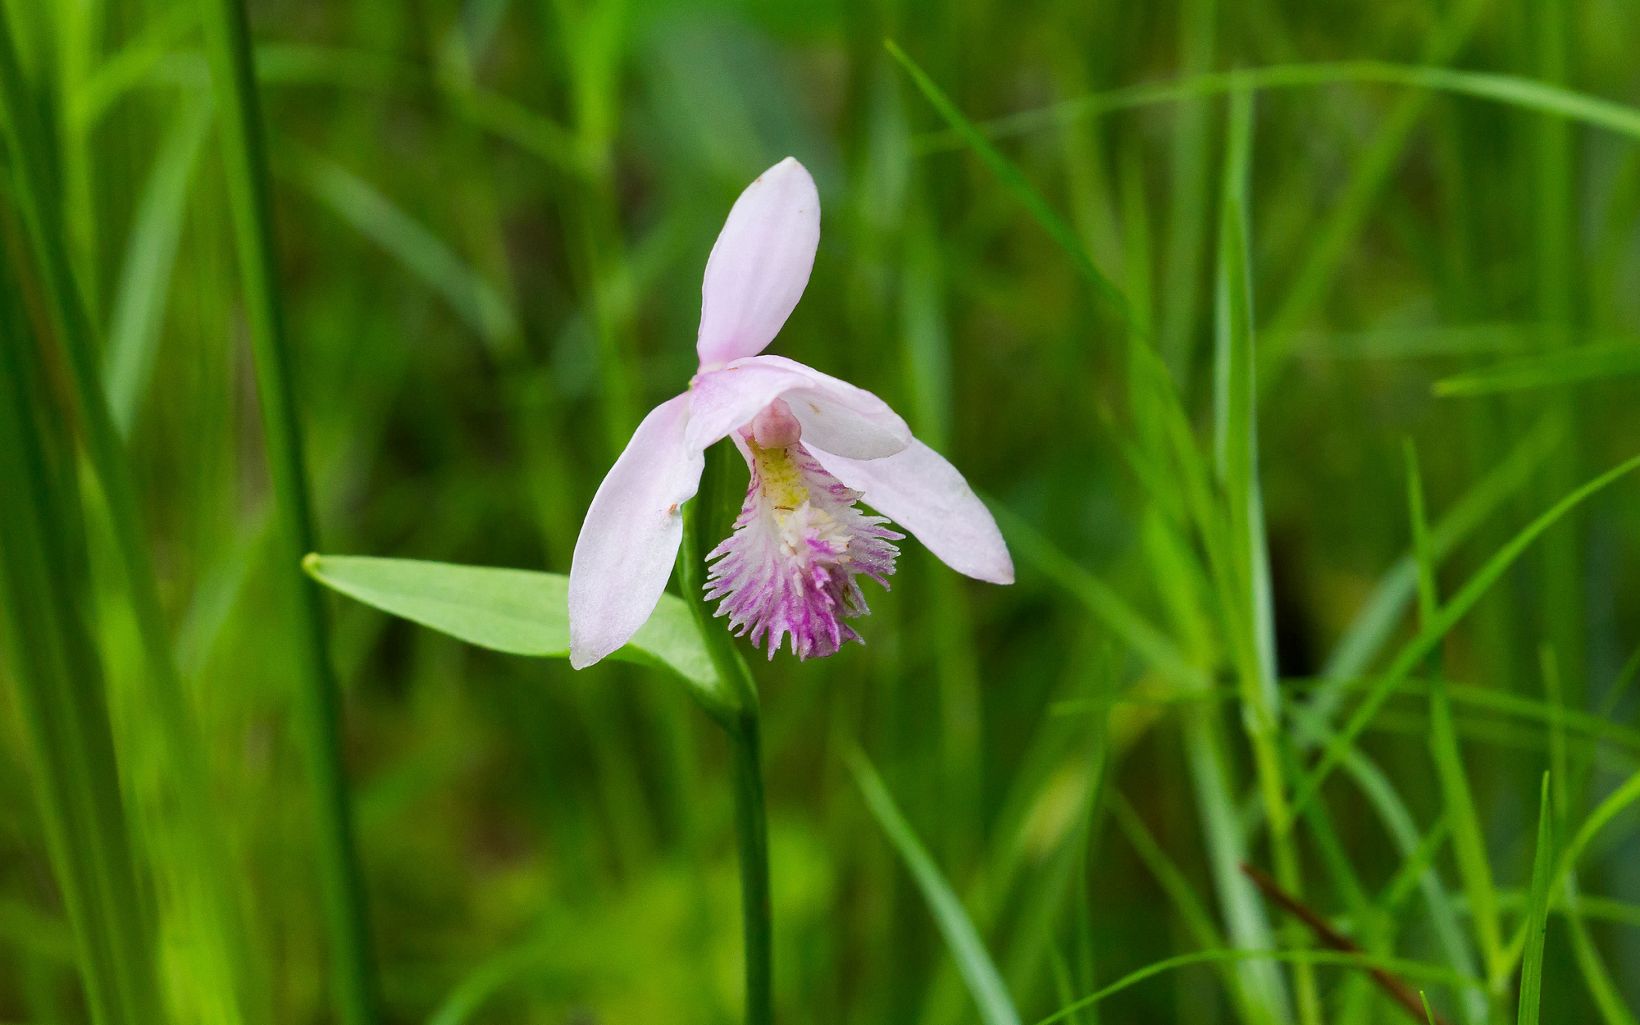 Rose pogonia orchid (Pogonia ophioglossoides) Considered threatened in Ohio. A bog plant that blooms in June. © Emily Speelman